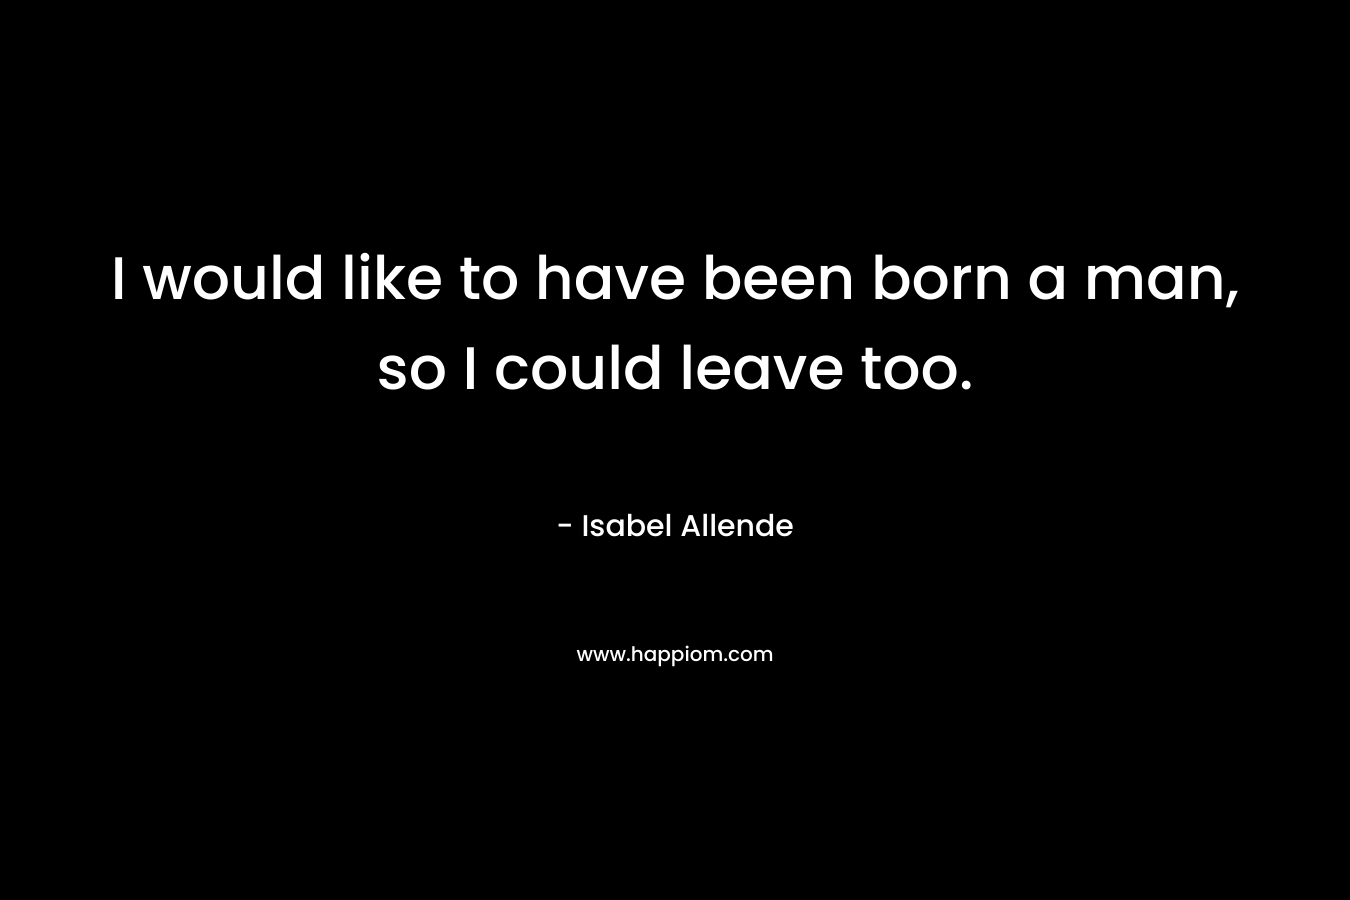 I would like to have been born a man, so I could leave too. – Isabel Allende